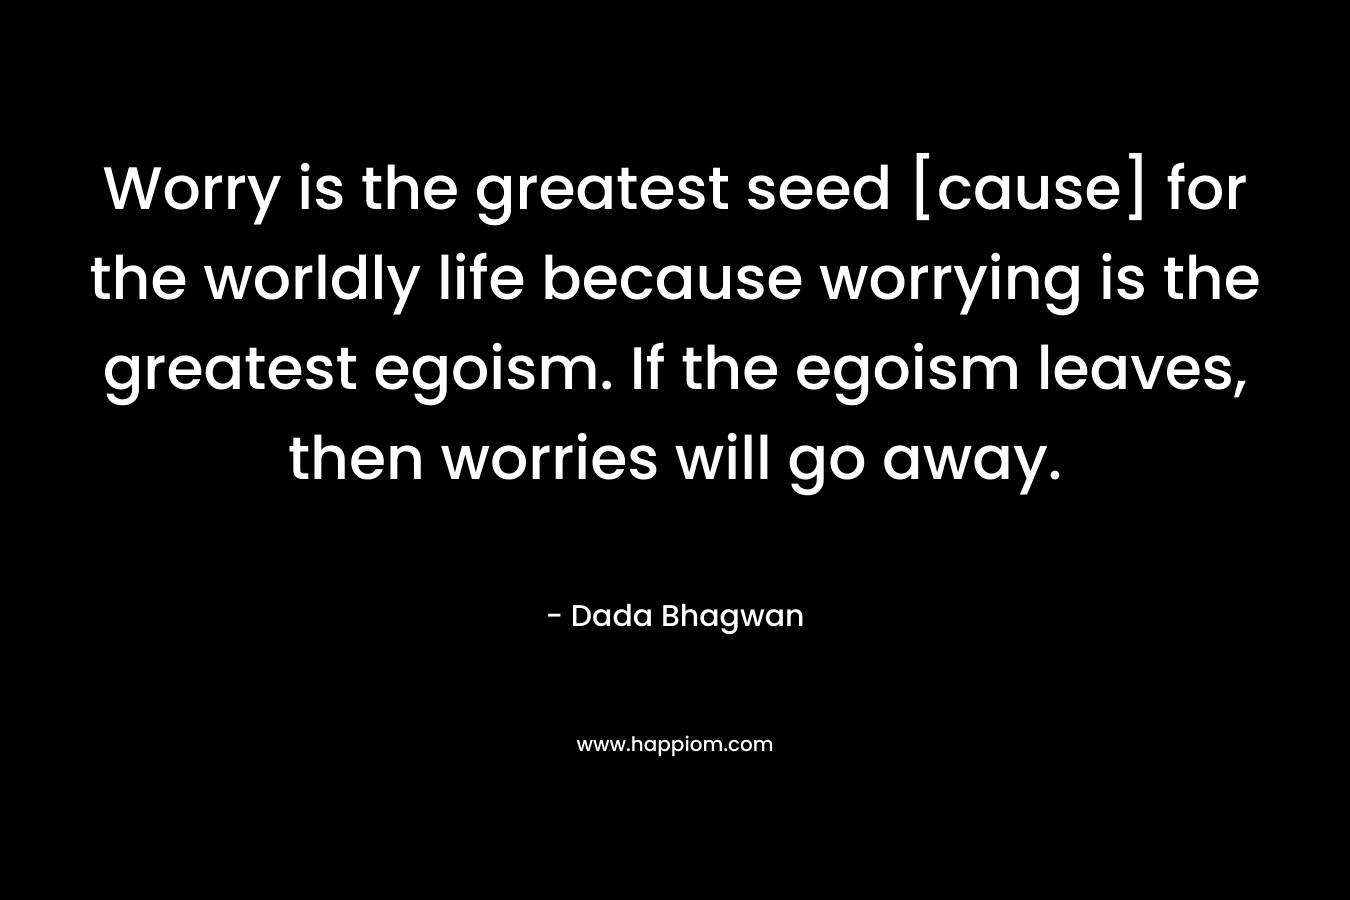 Worry is the greatest seed [cause] for the worldly life because worrying is the greatest egoism. If the egoism leaves, then worries will go away.